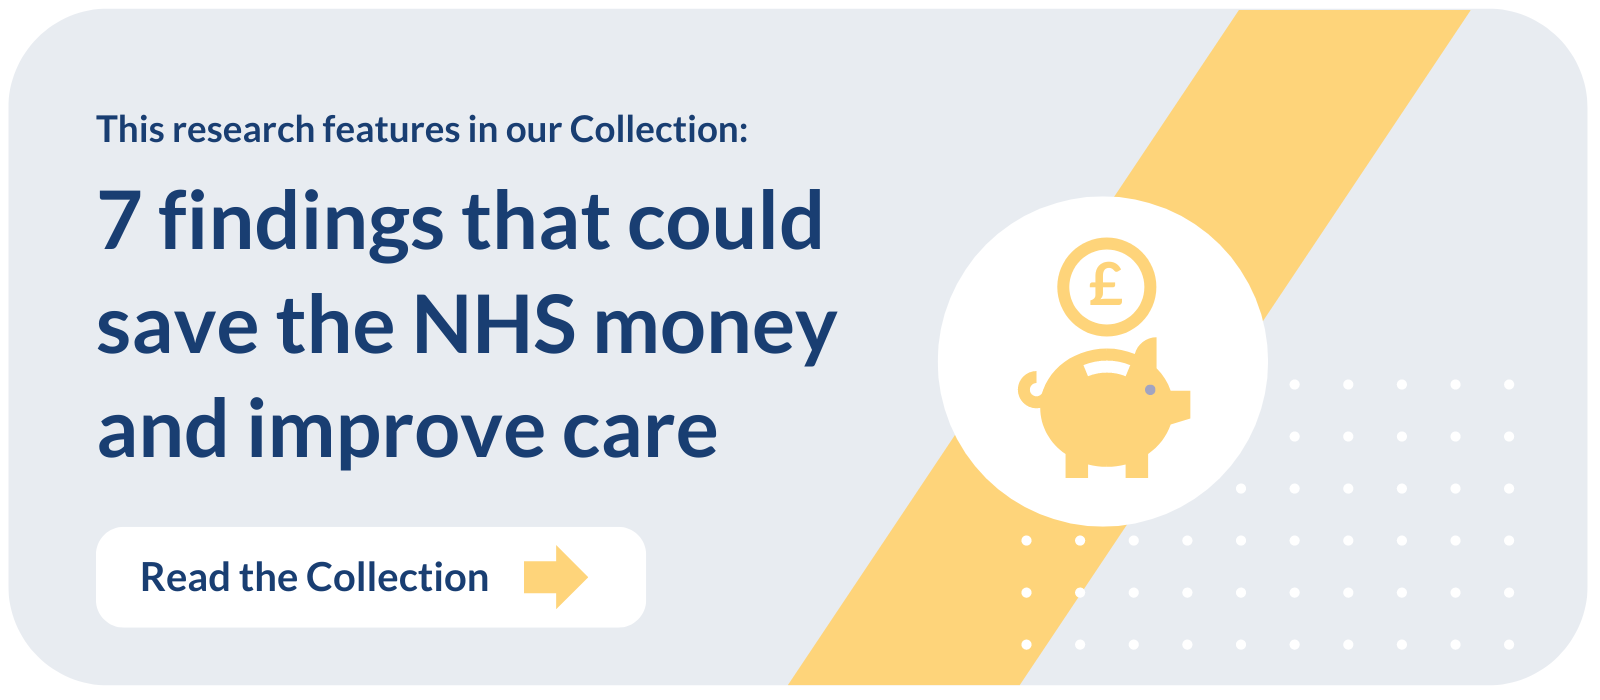 This research features in our Collection: 7 findings that could save the NHS money and improve care. Read the Collection